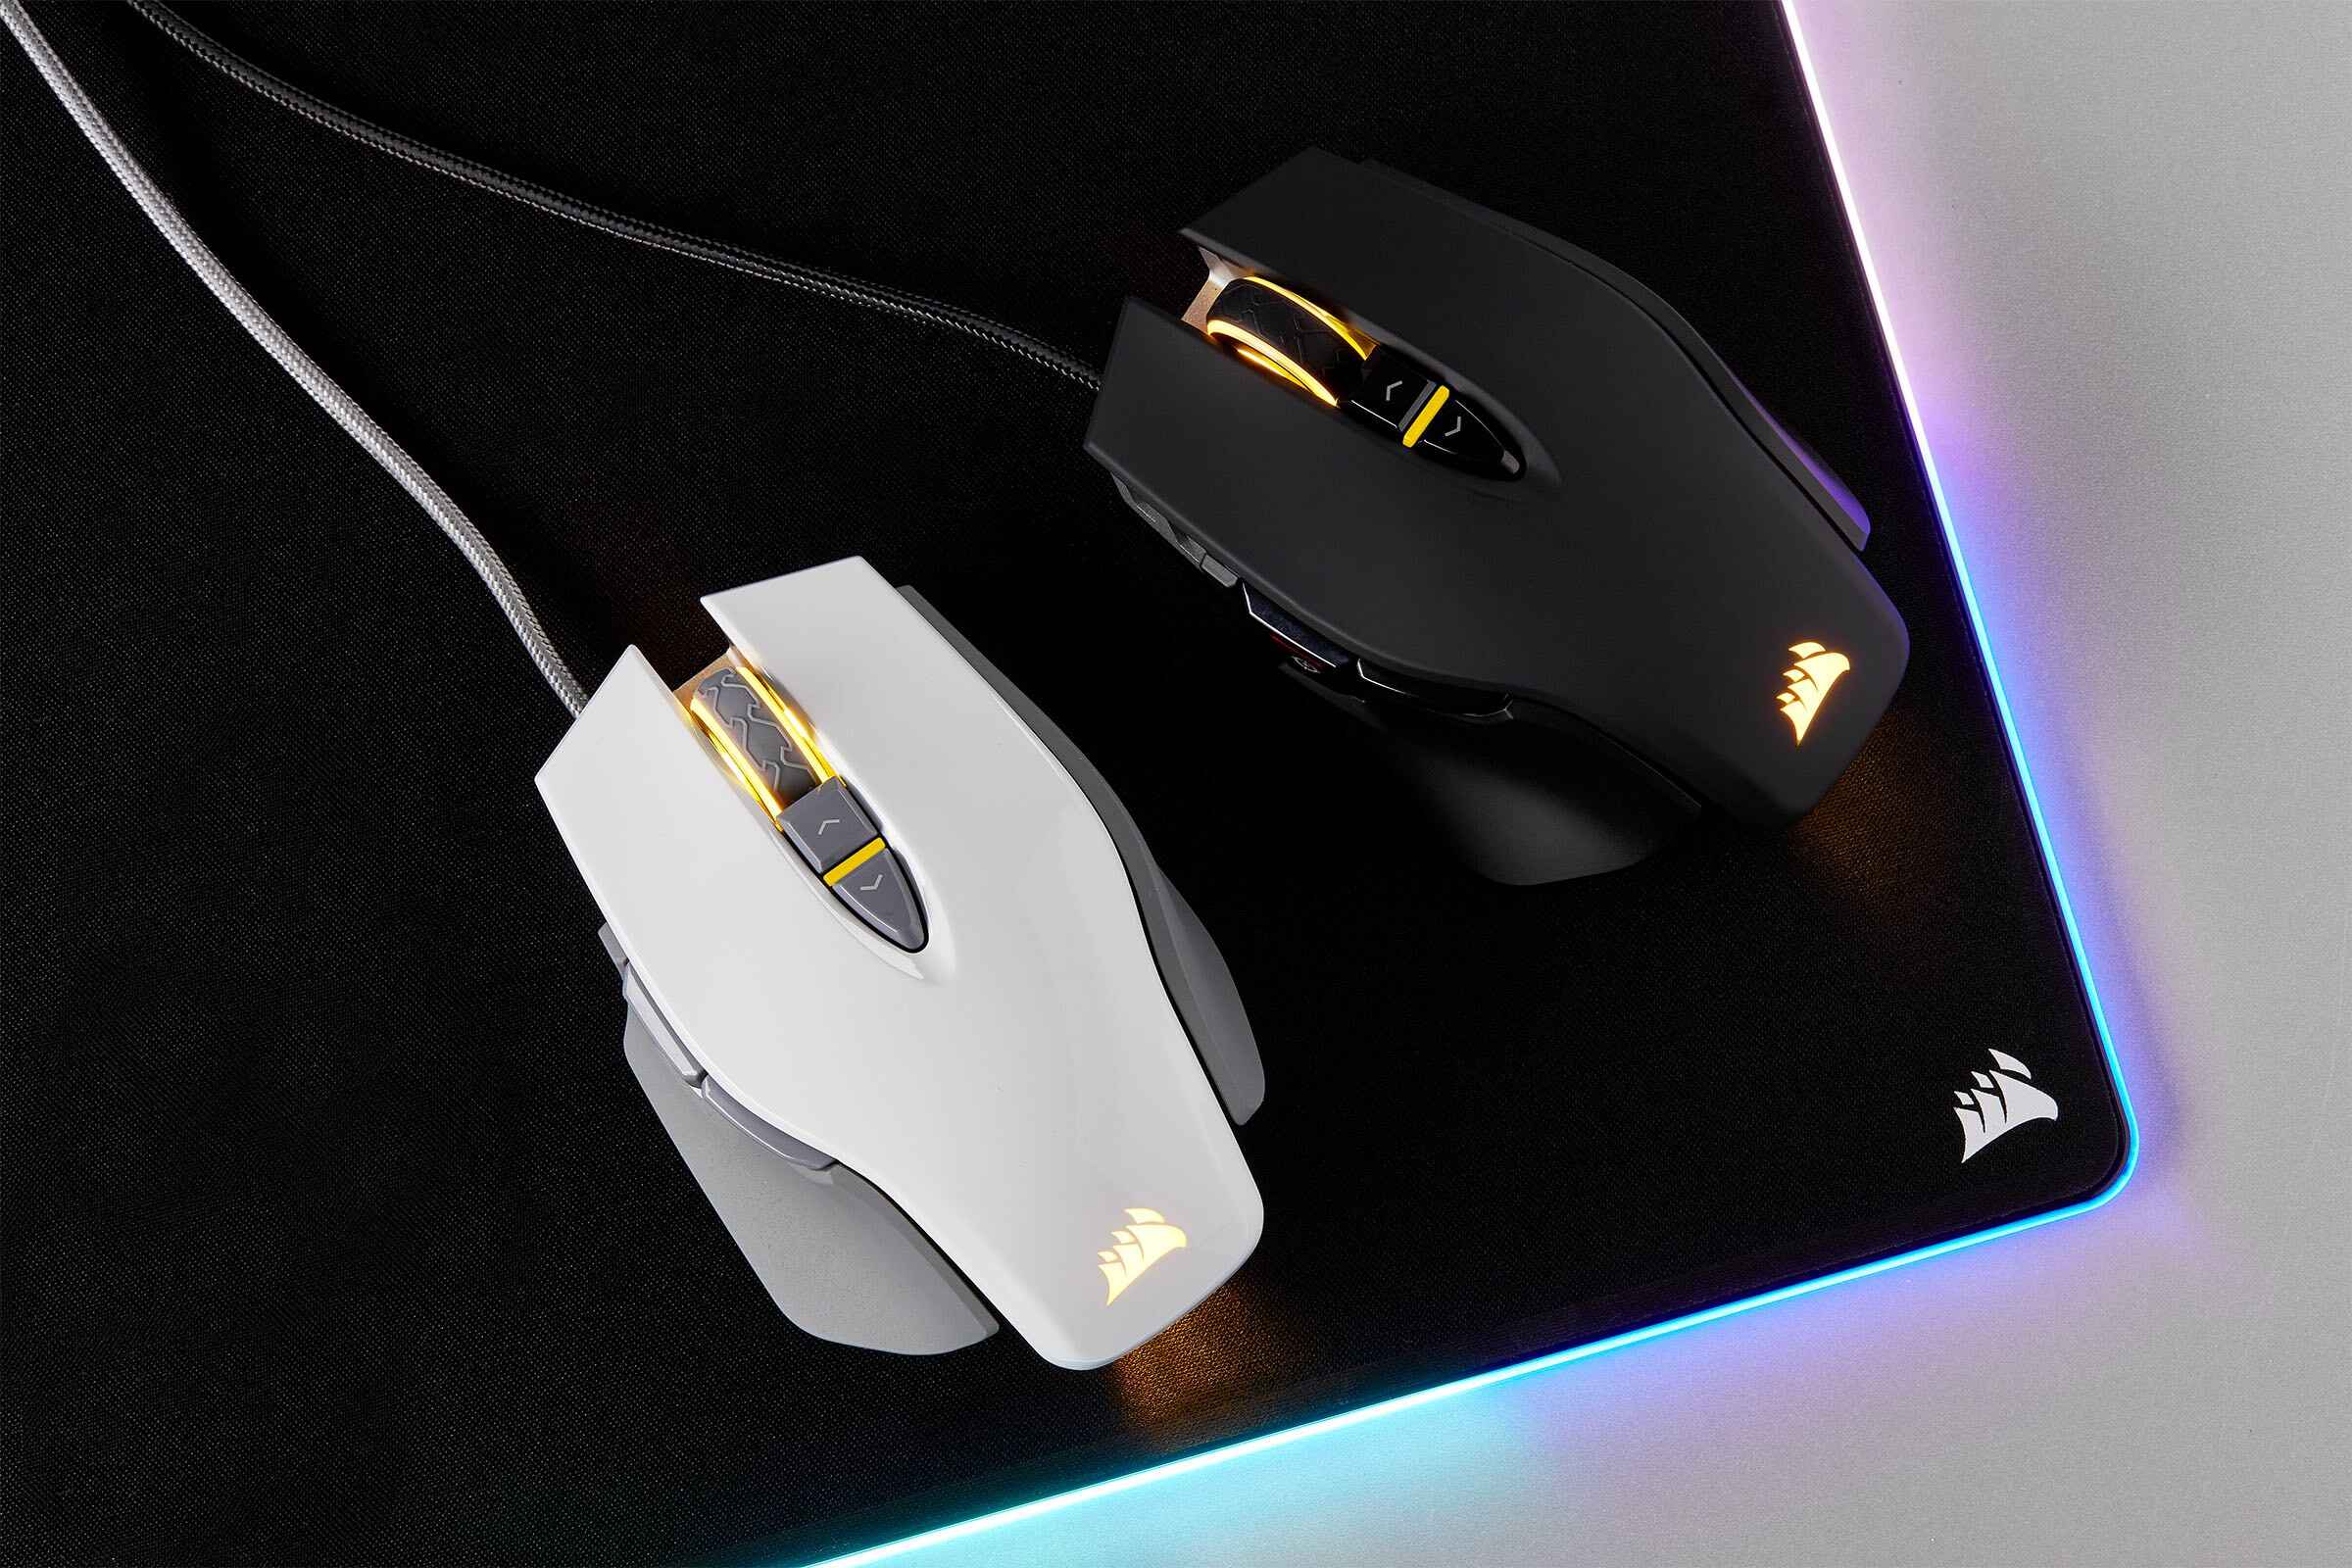 How To Program M65 Gaming Mouse